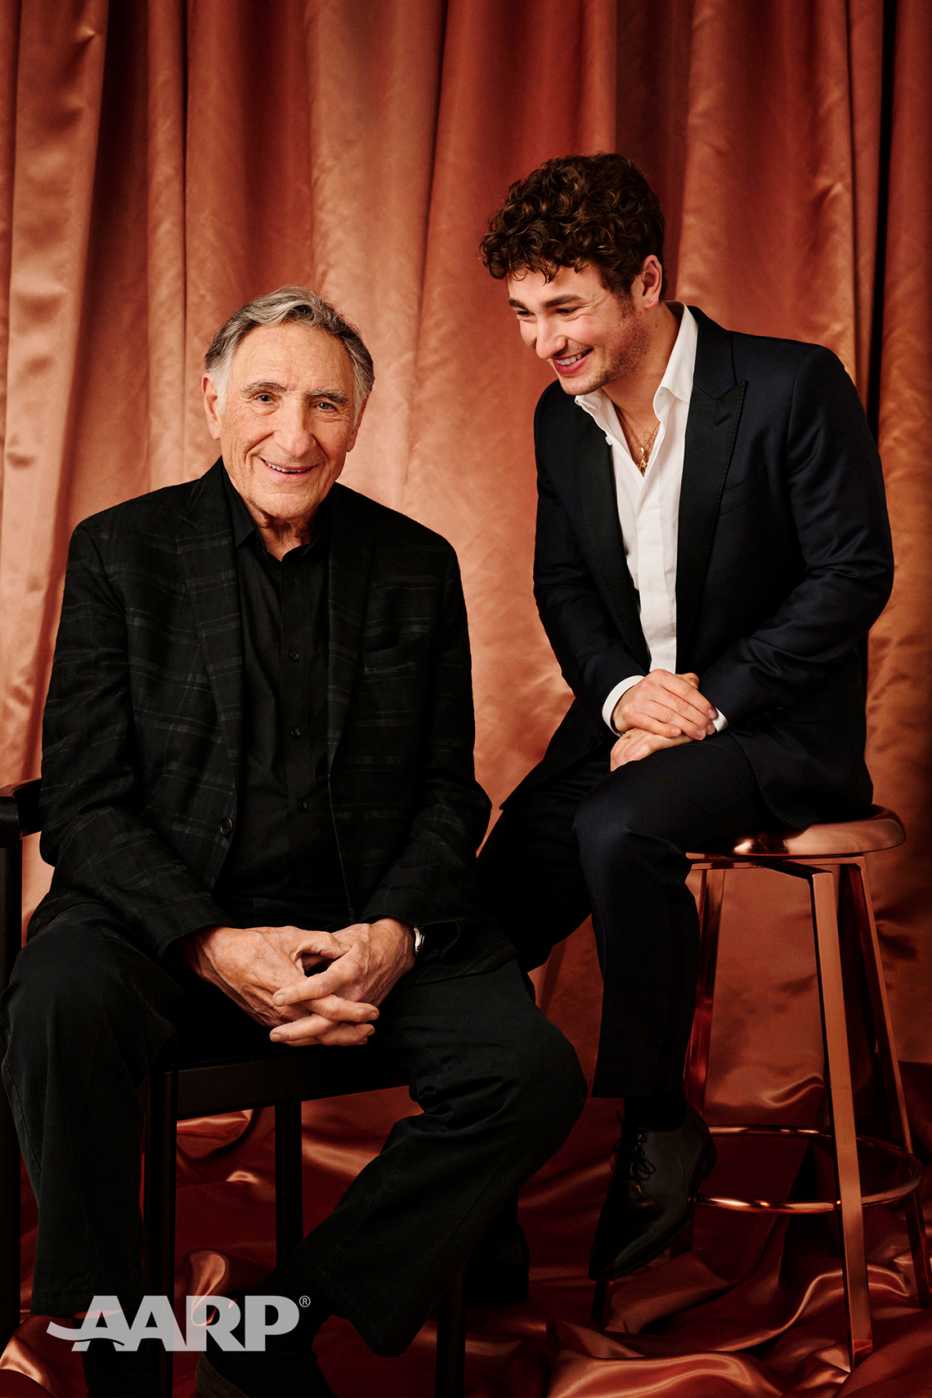 Judd Hirsch and Gabriel LaBelle sit together for a portrait at the AARP Movies for Grownups Awards